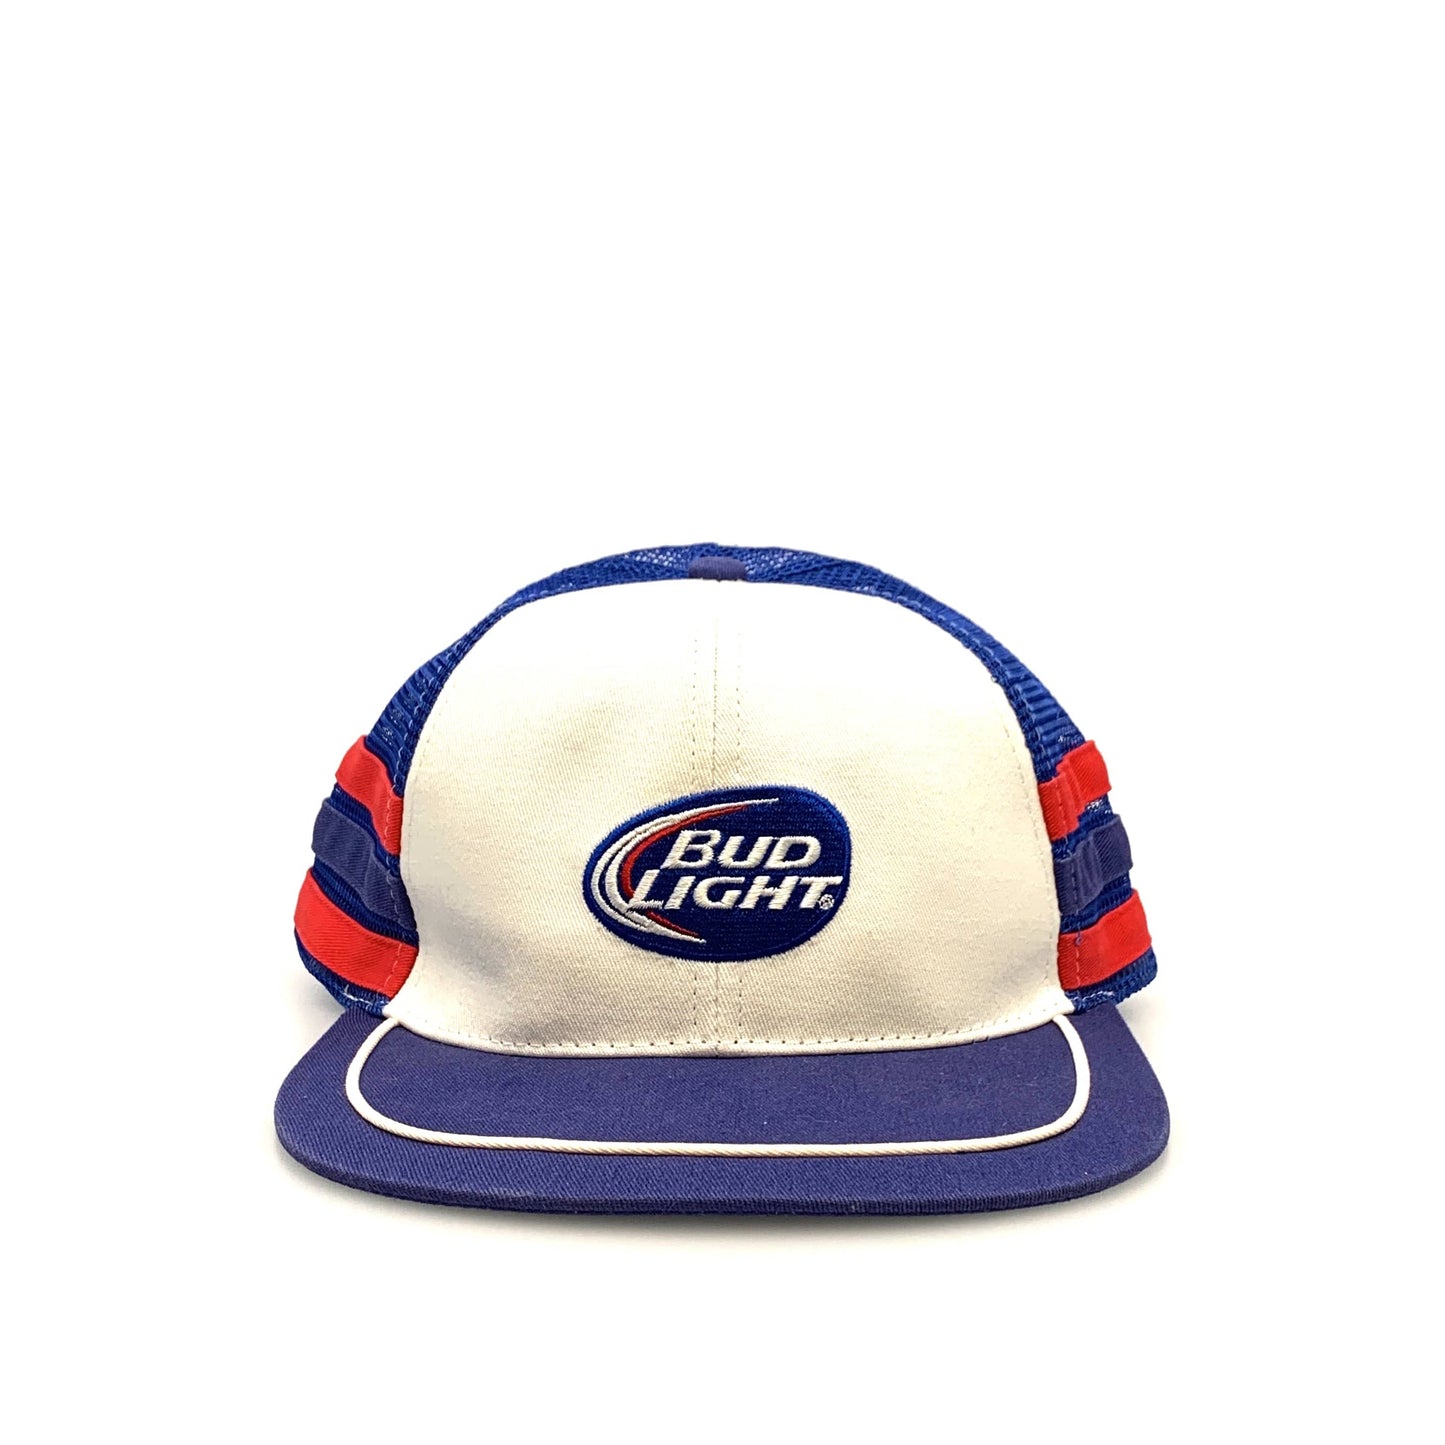 K Products Mesh 3 Stripe Trucker Hat Red White Blue Bud Light Beer OS